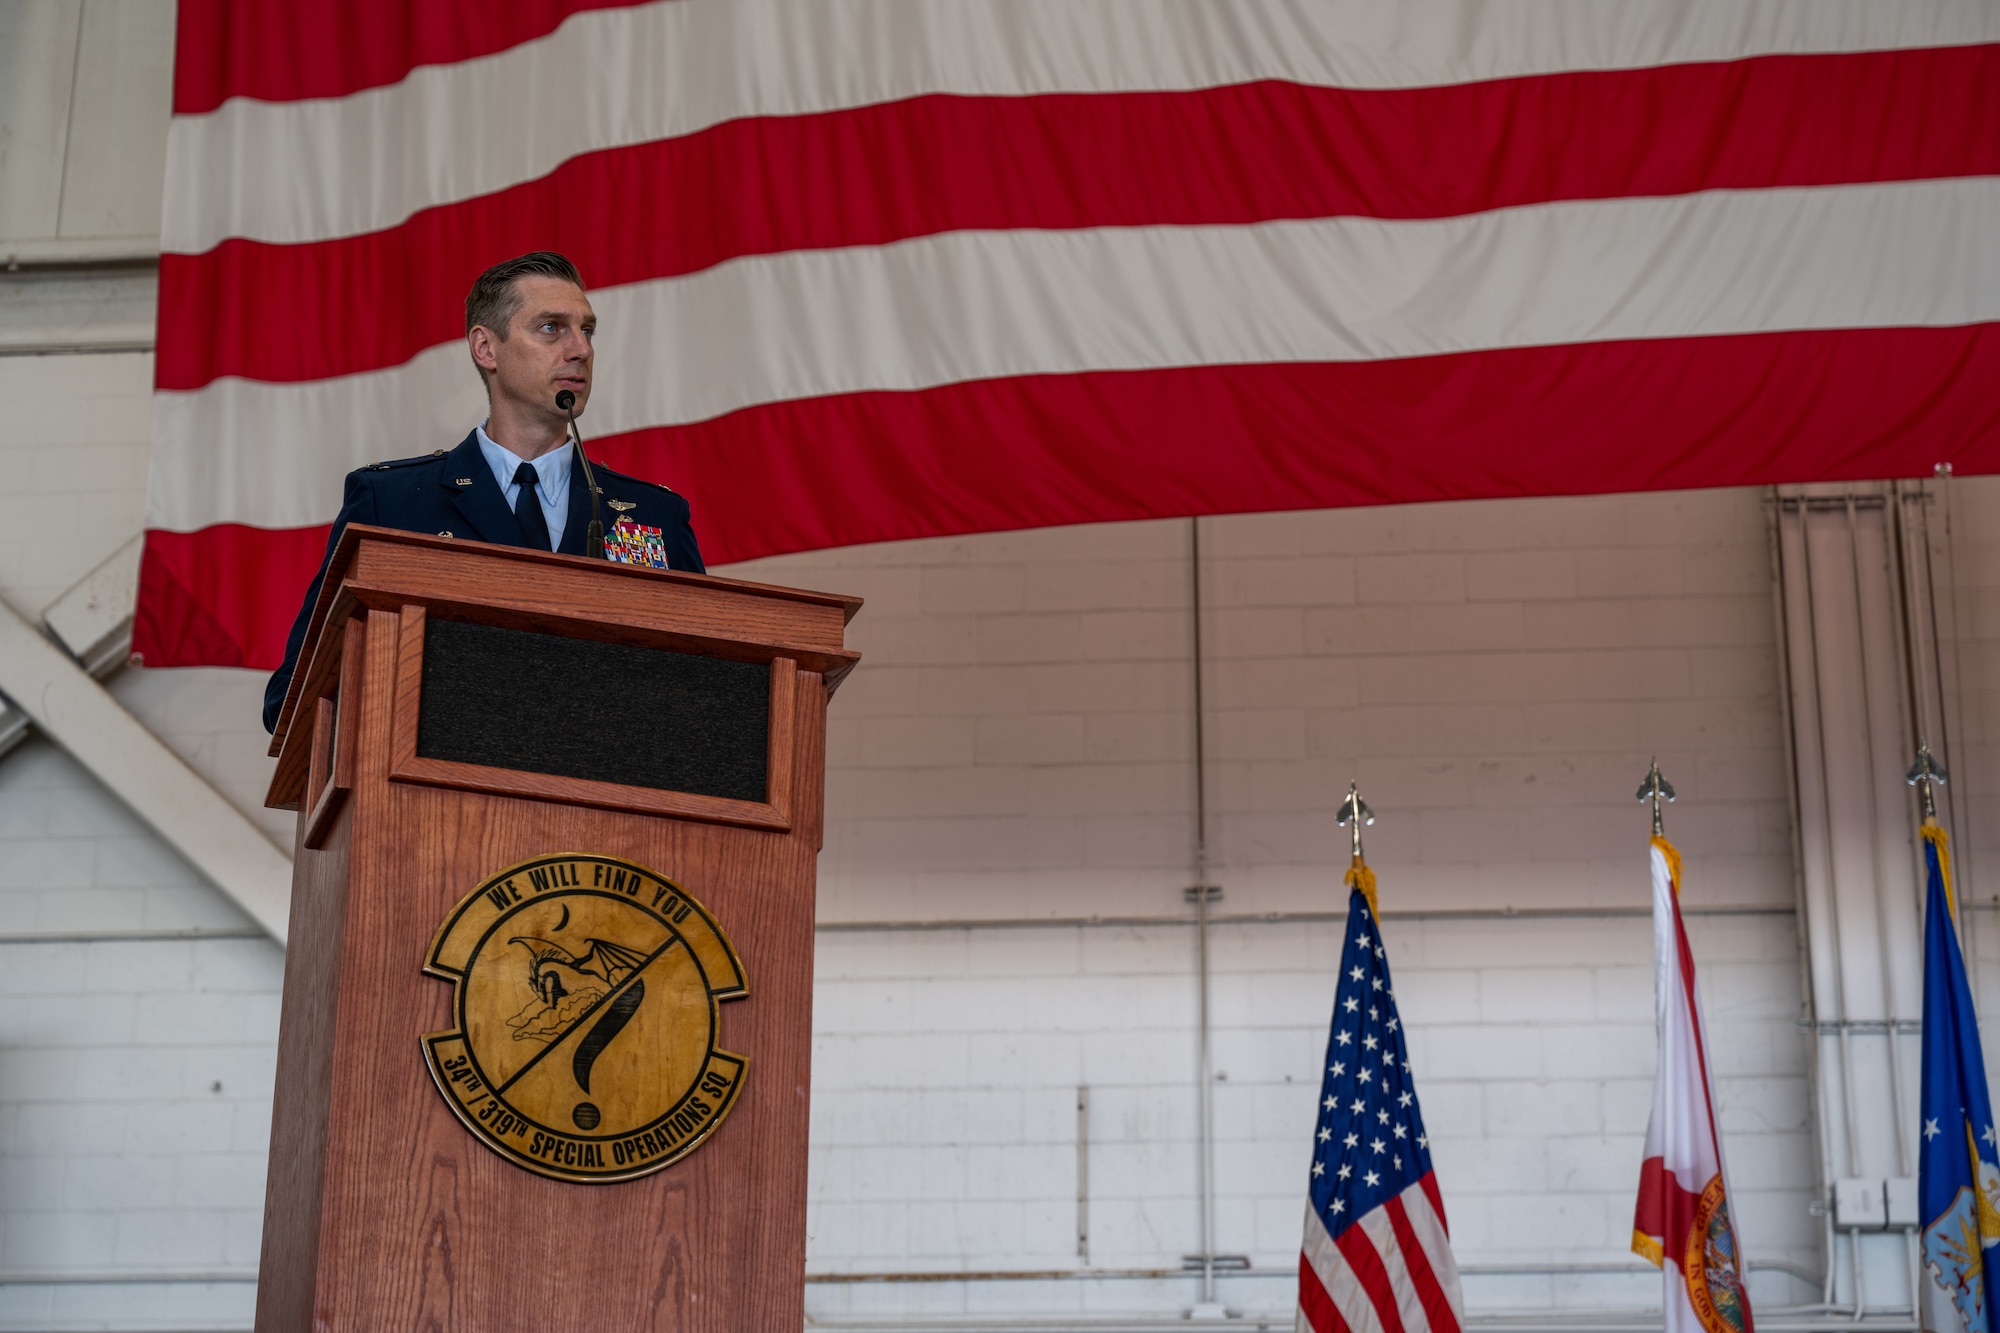 319th change of command and reassignment